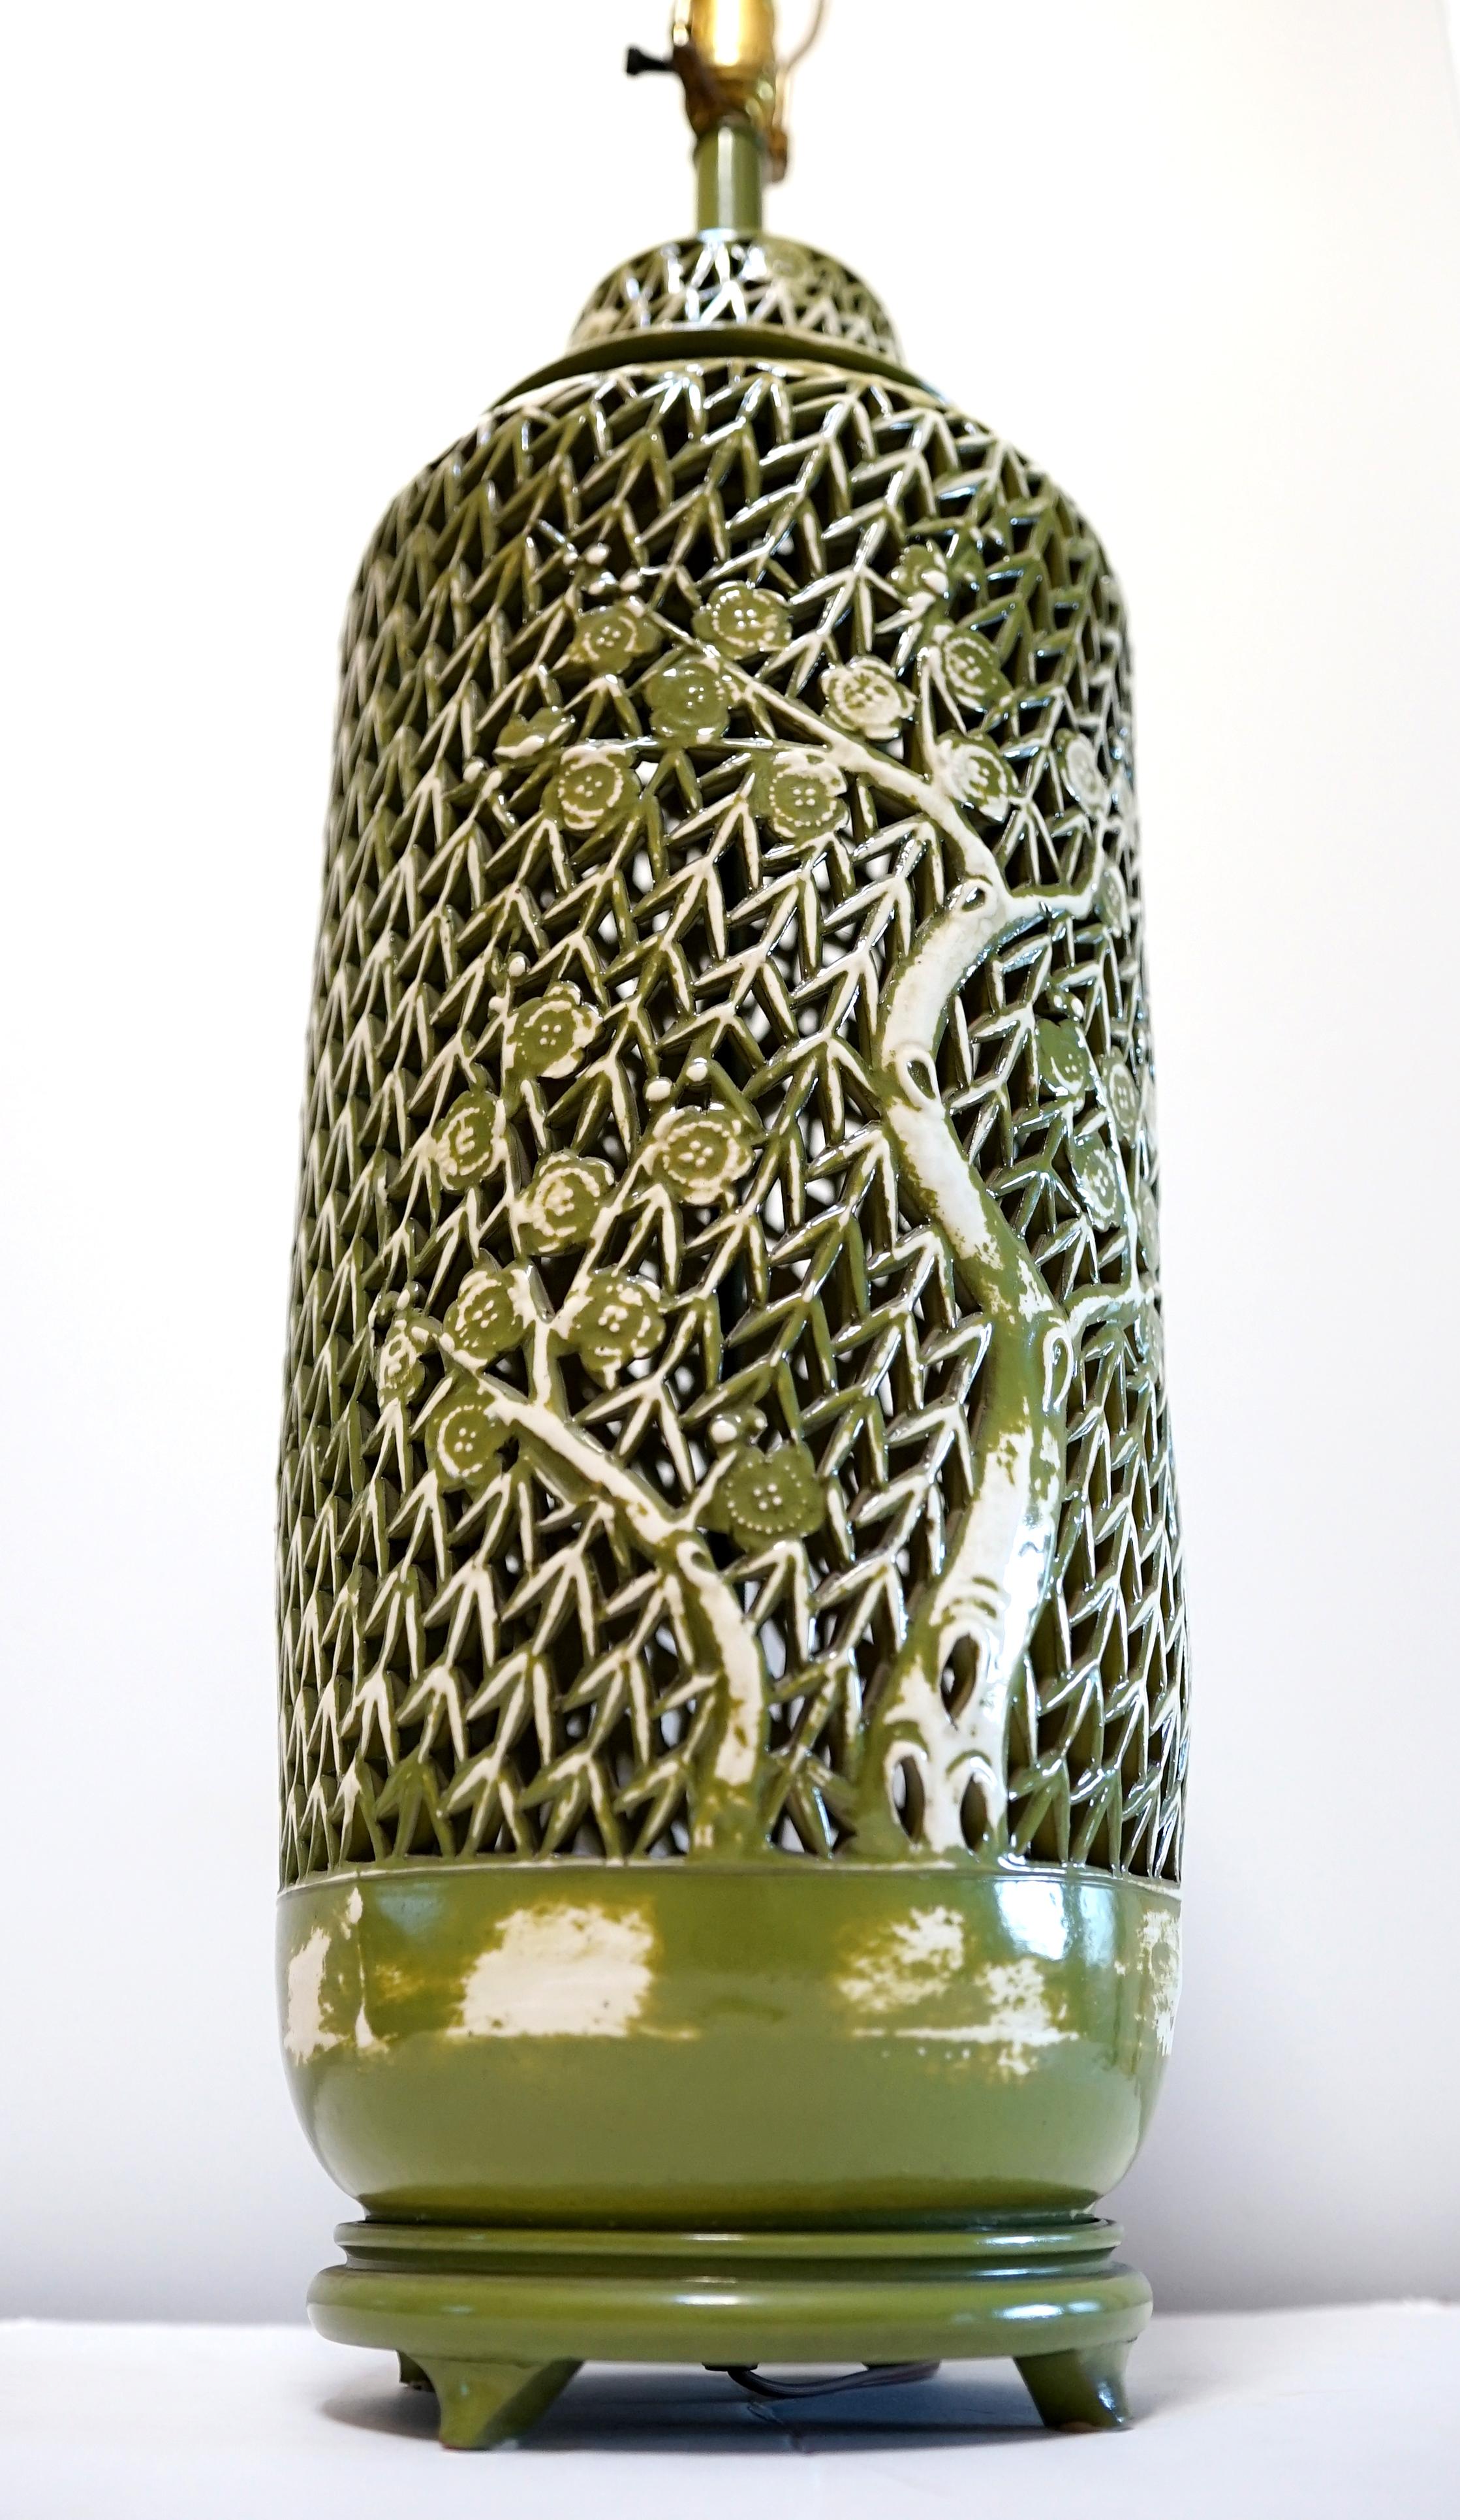 Vintage Chinoiserie Style Olive Green, White Rare Pierced Monumental Table Lamp For Sale 5